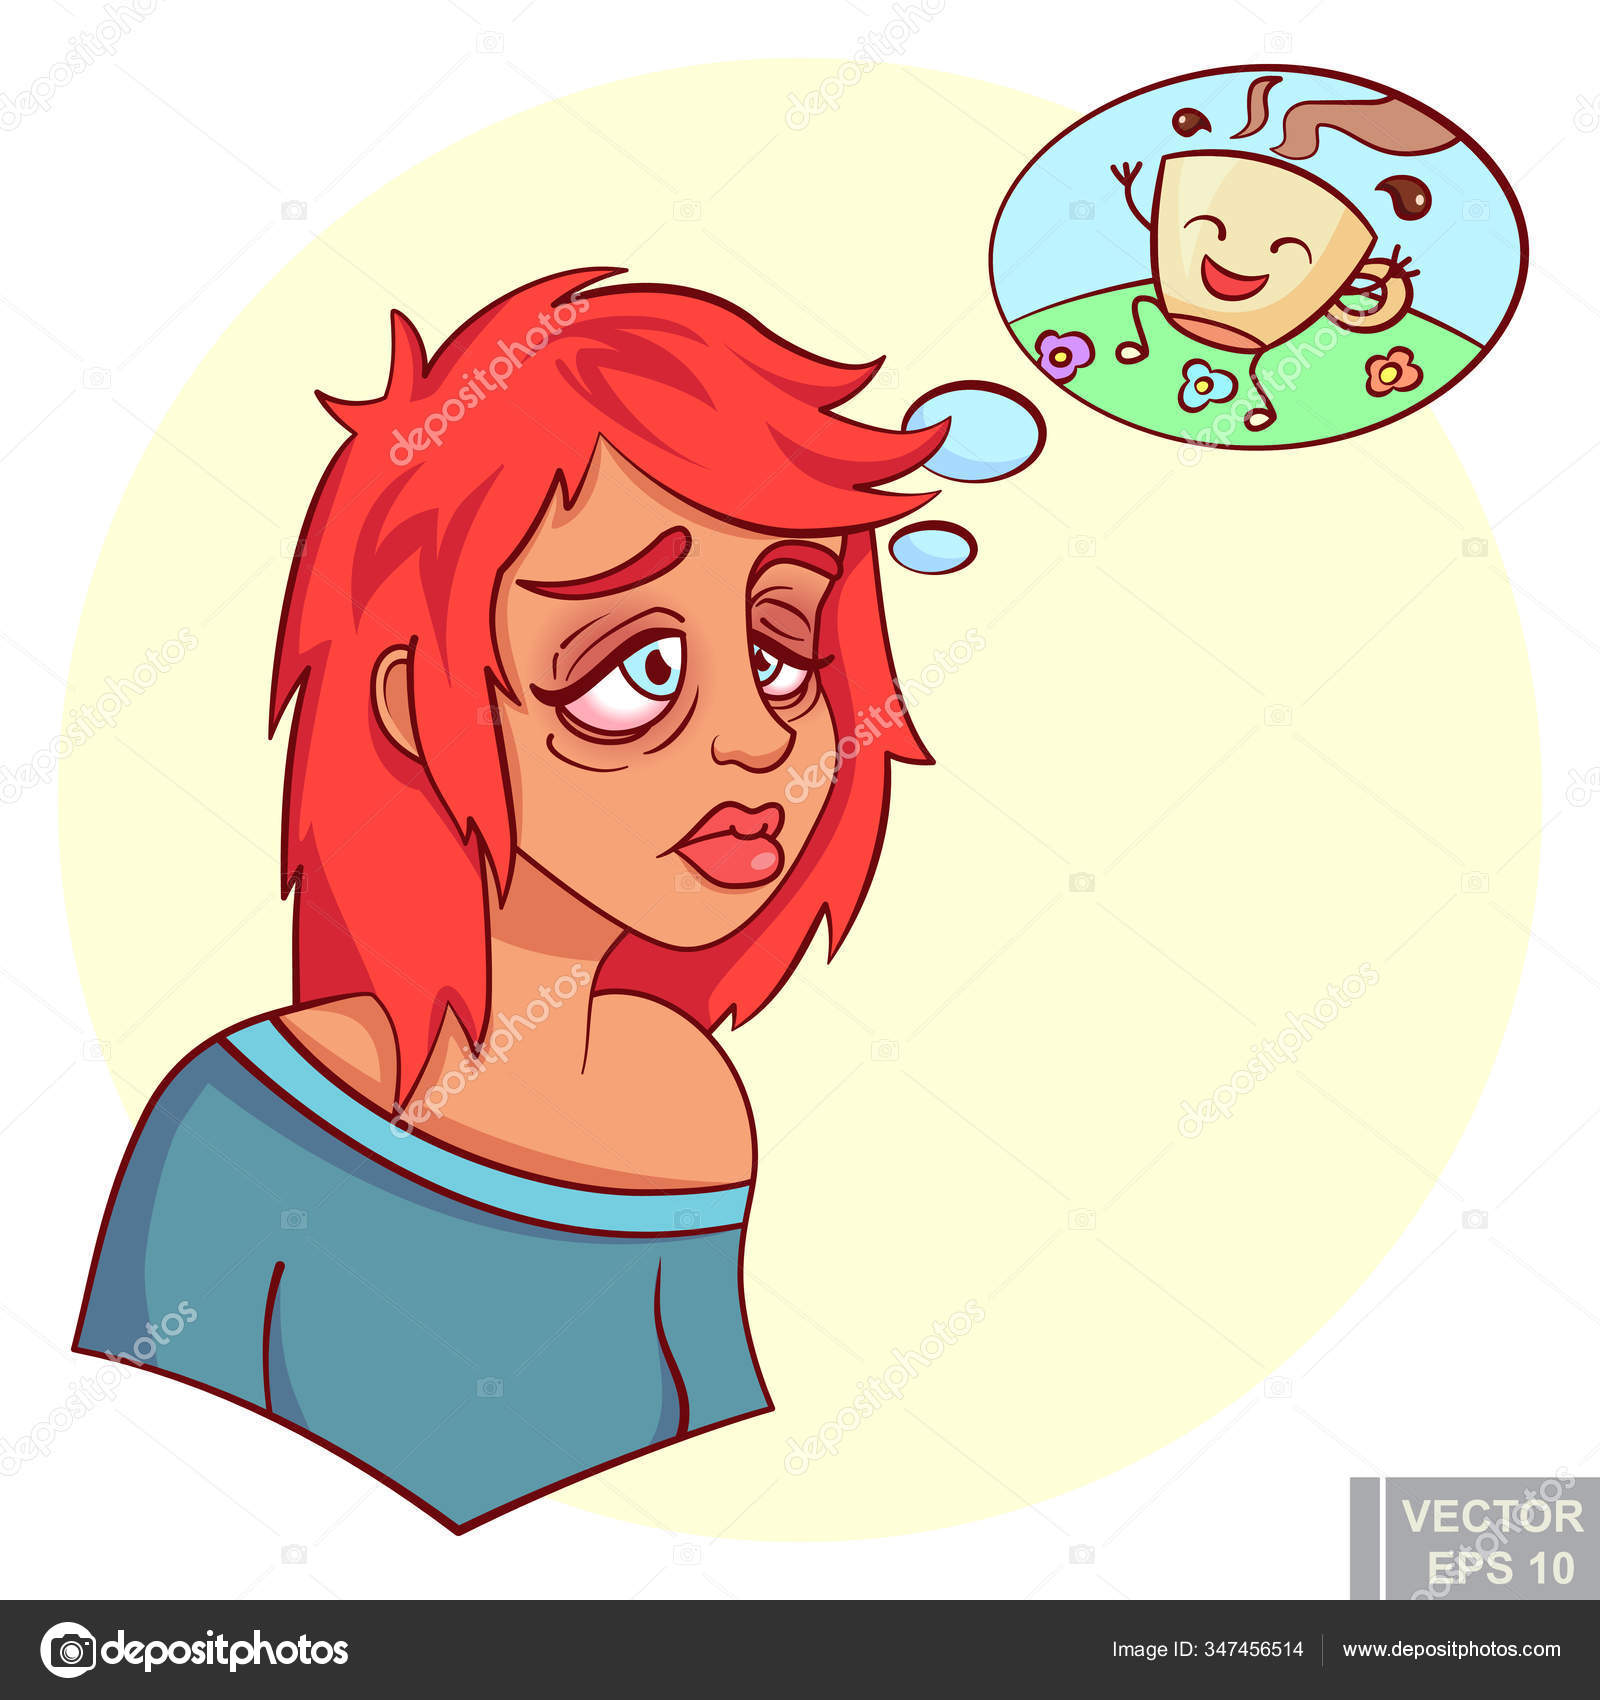 Tired woman funny Vector Art Stock Images | Depositphotos